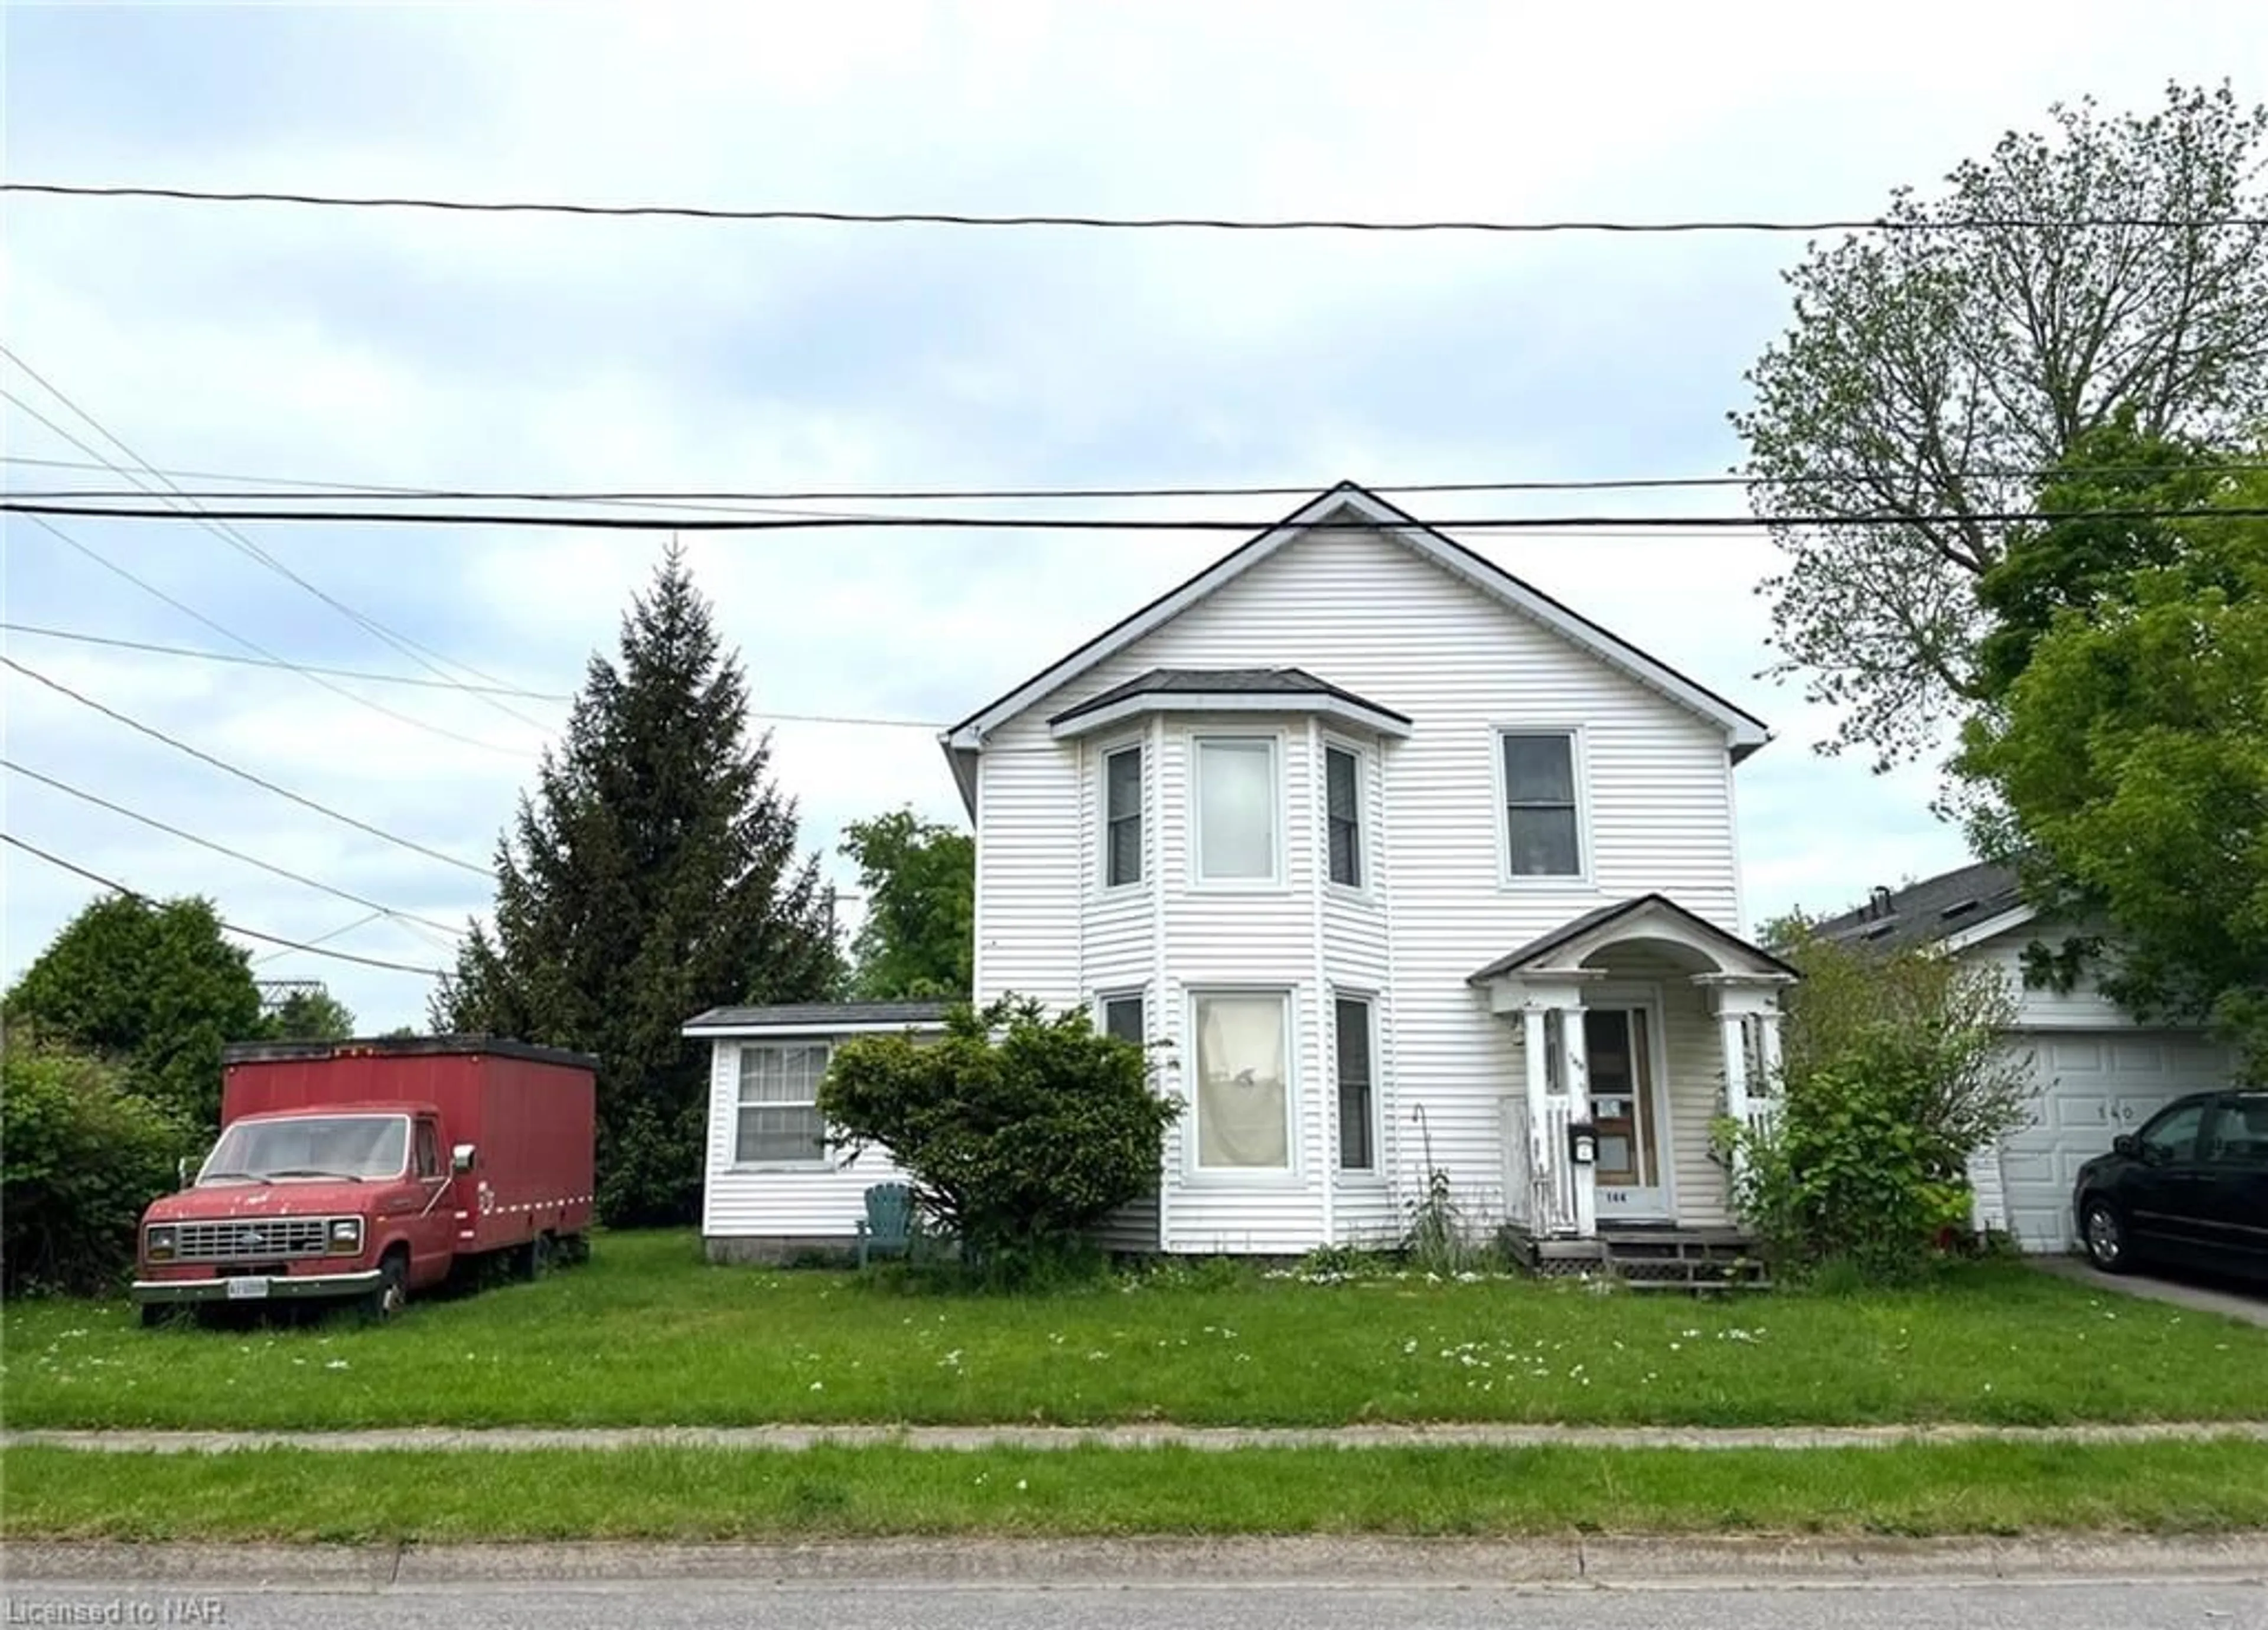 Frontside or backside of a home for 144 Waterloo St, Fort Erie Ontario L2A 3K2